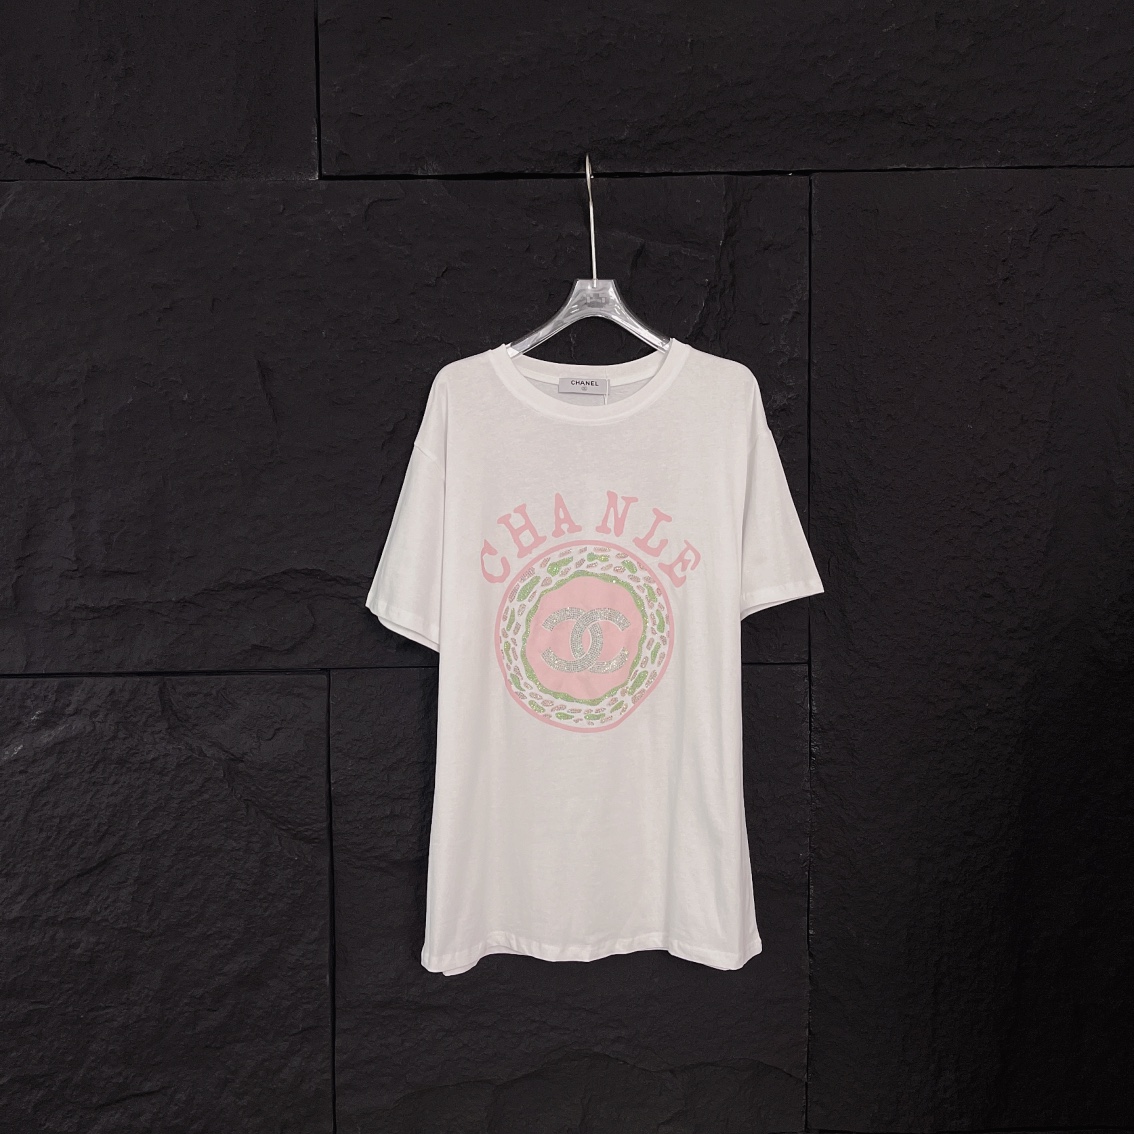 Chanel Clothing T-Shirt Pink White Summer Collection Short Sleeve